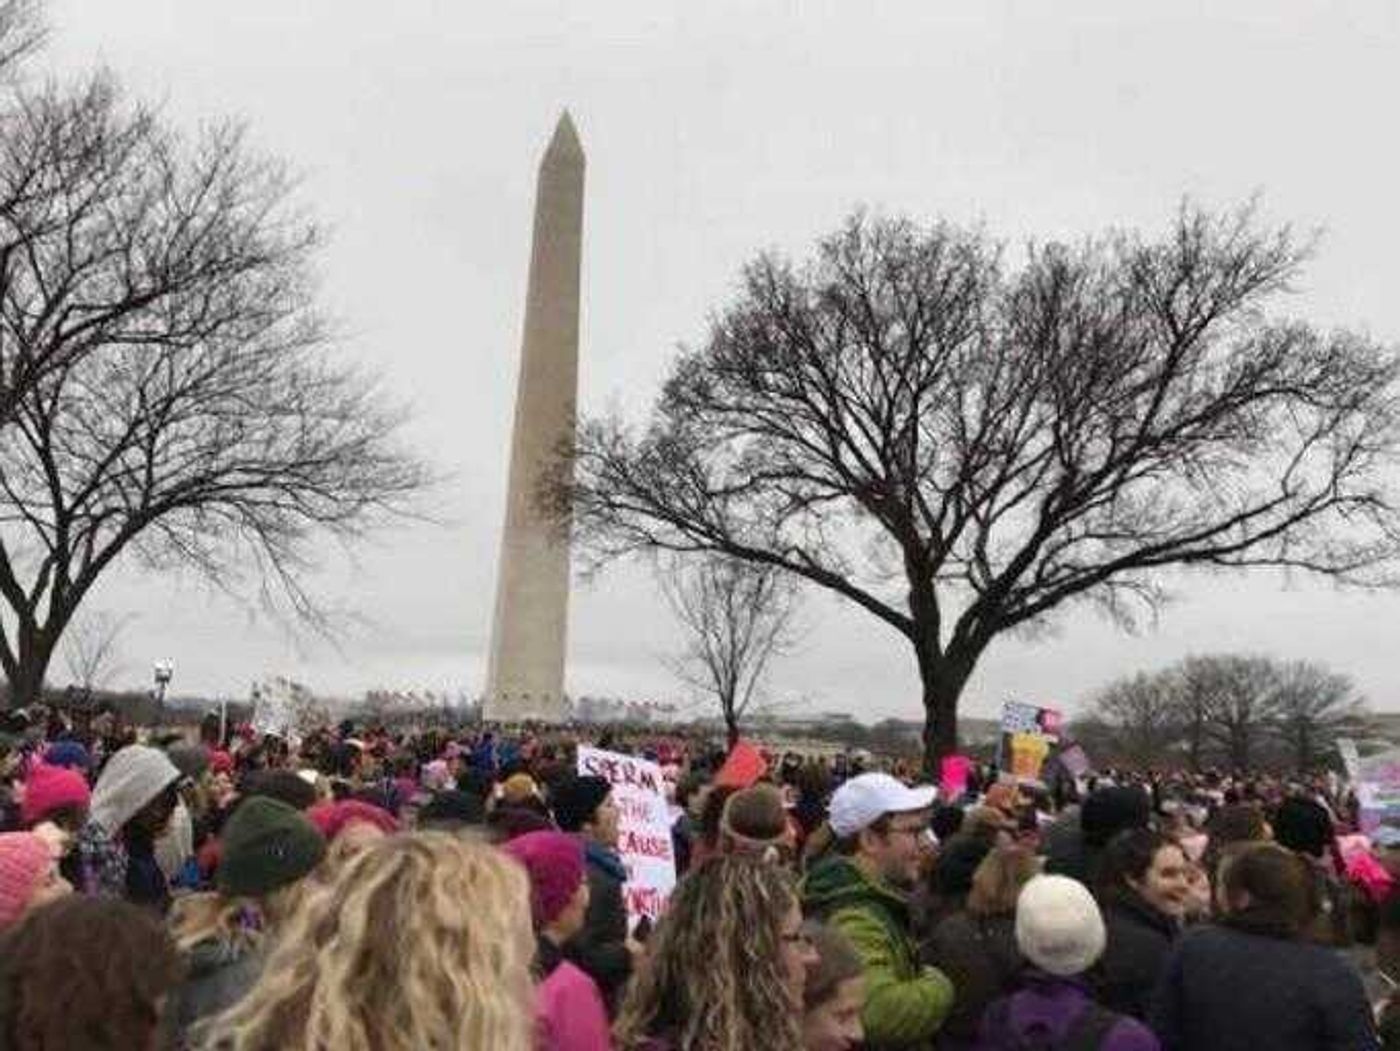 With the Washington Monument in the background, women marched on Jan. 21 in an event to go down in history.